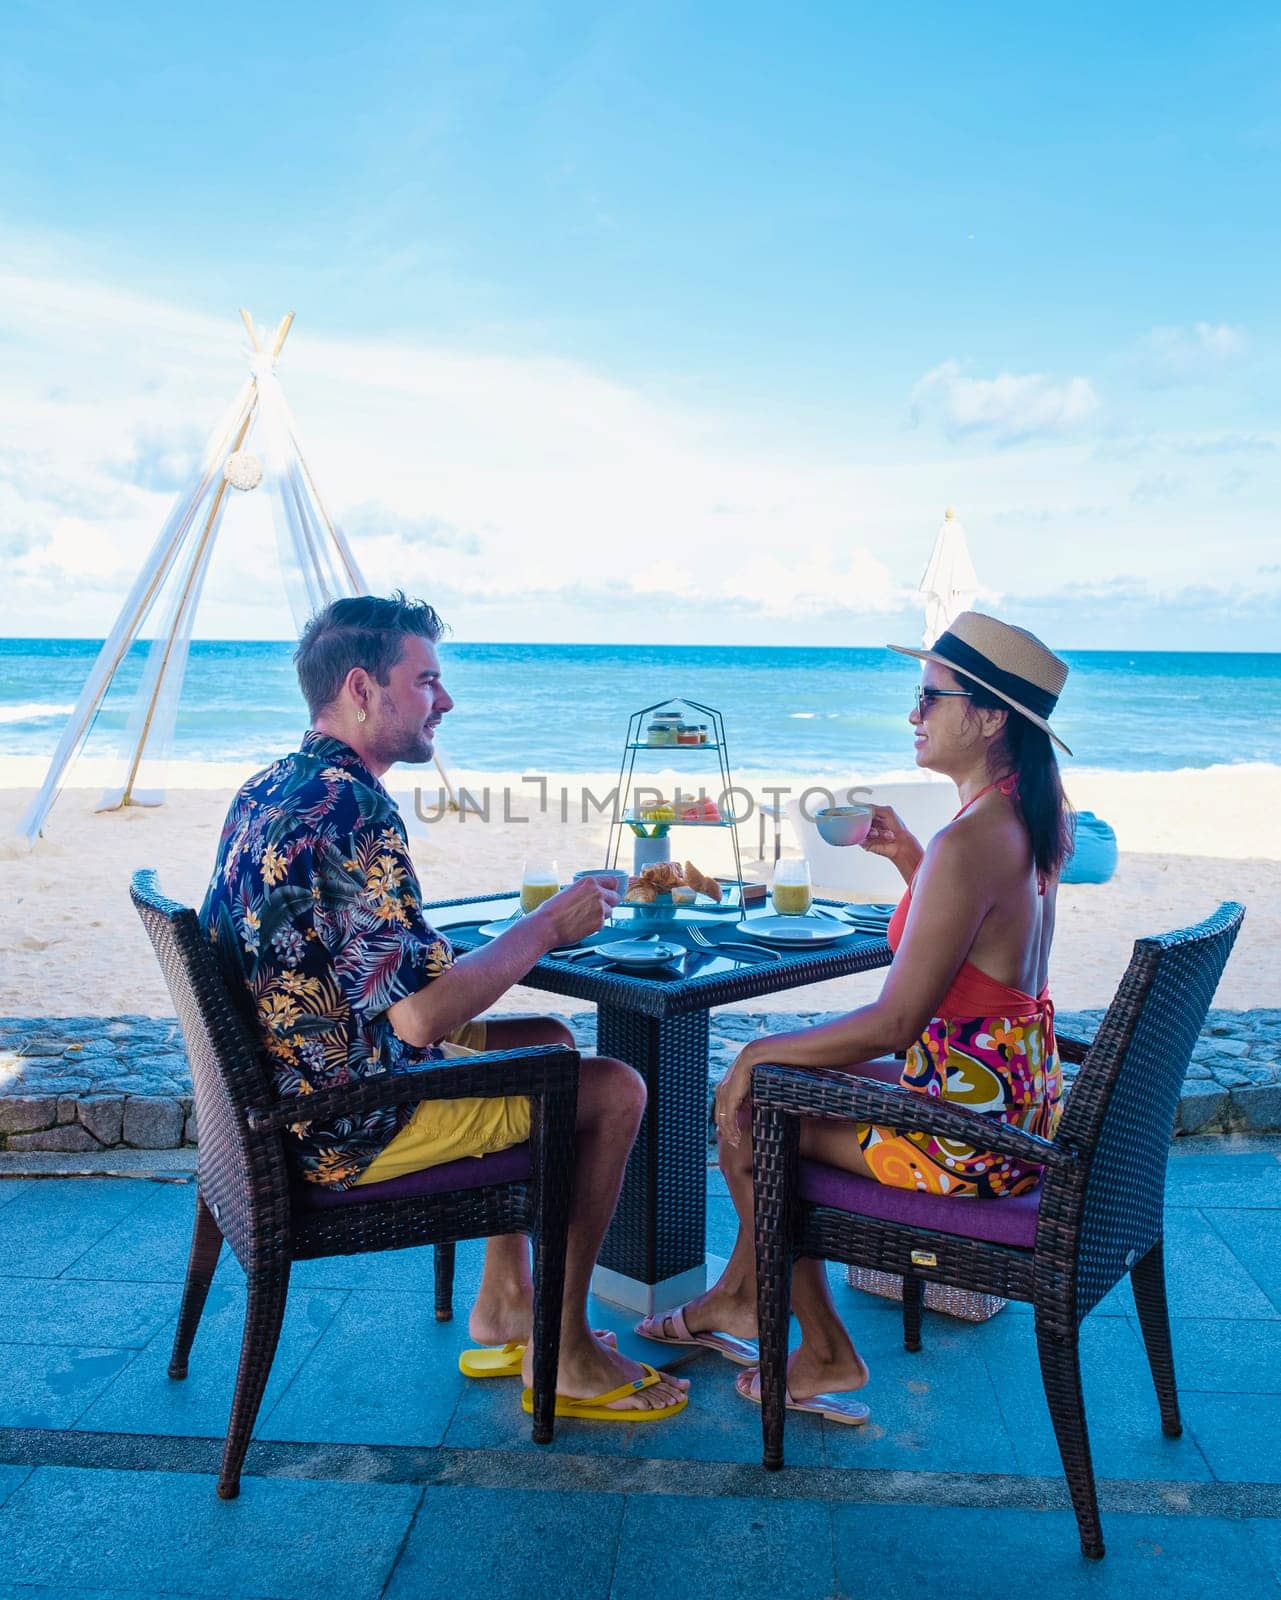 Breakfast on the beach in Phuket Thailand, Luxury breakfast table with food and beautiful tropical sea view background., luxury travel and lifestyle by fokkebok